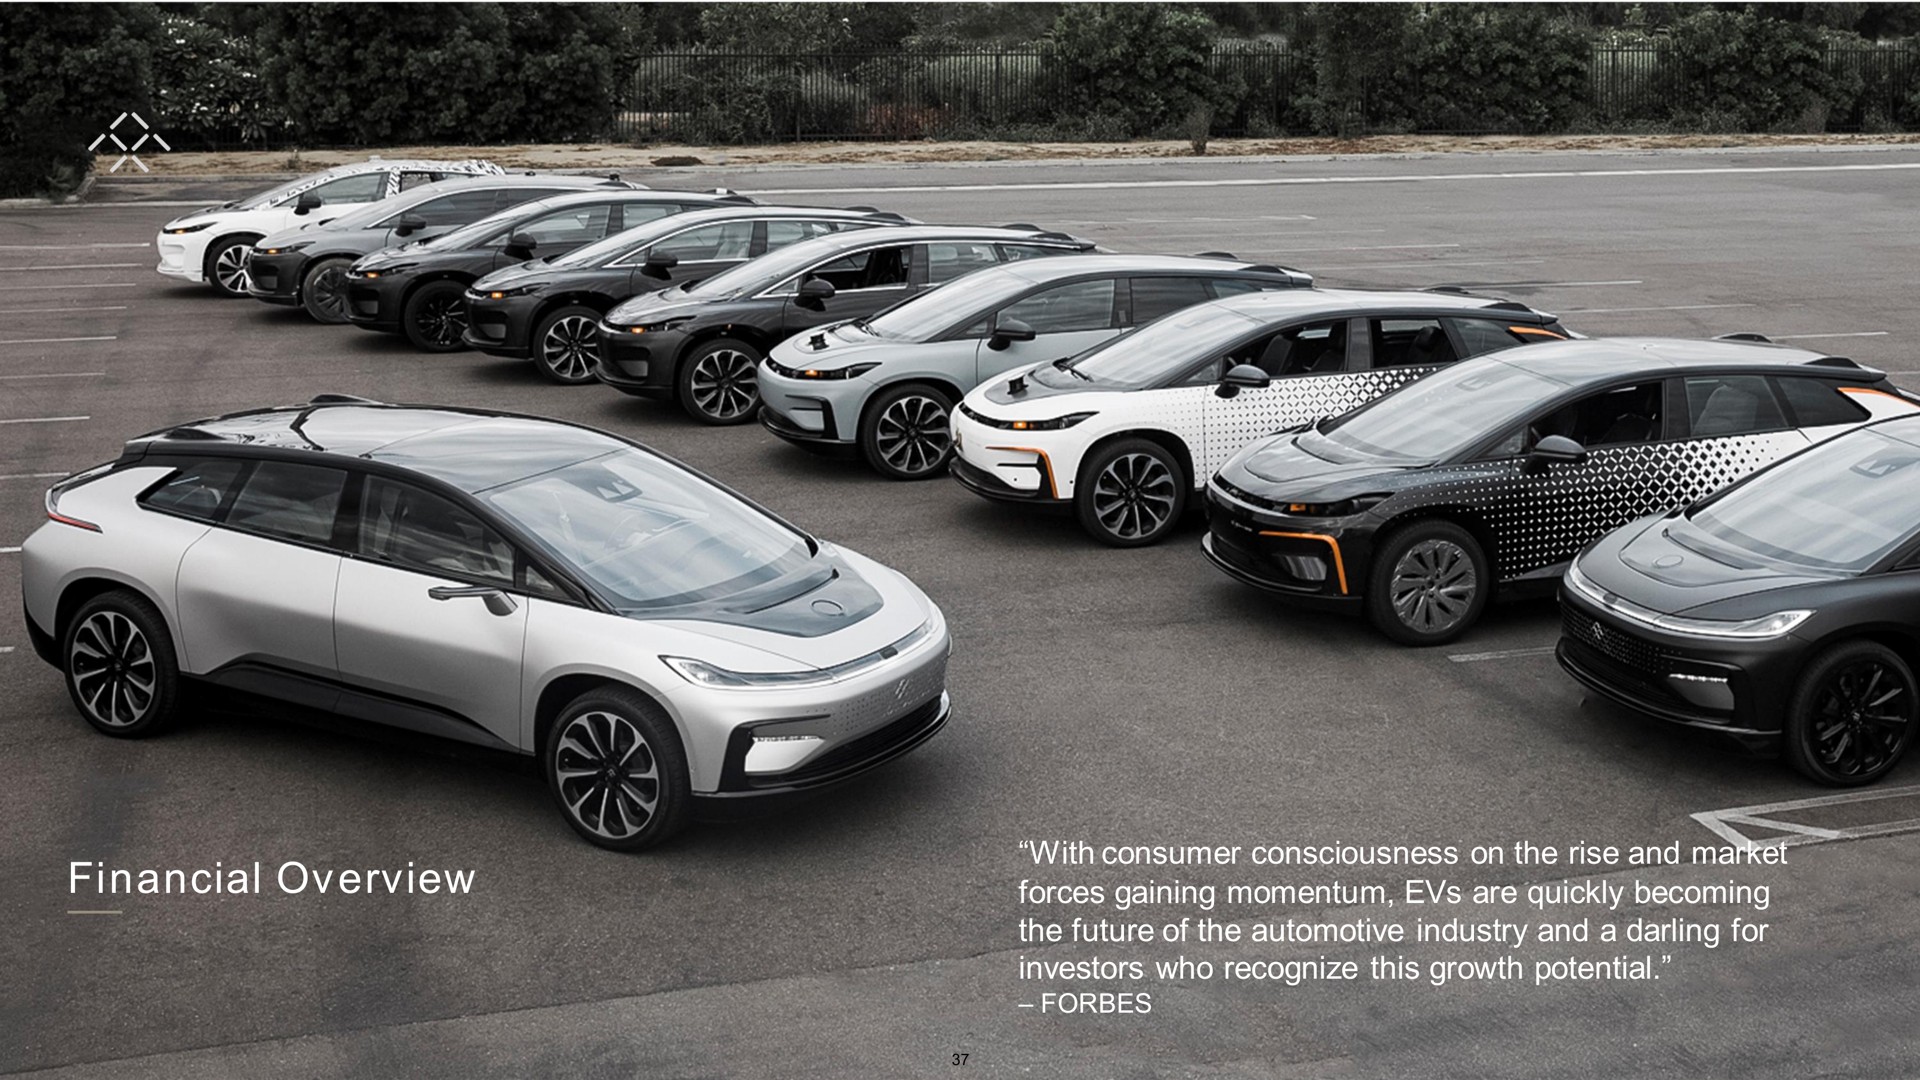 financial with consumer consciousness on the rise and market forces gaining momentum are quickly becoming the future of the automotive industry and a darling for investors who recognize this growth potential | Faraday Future